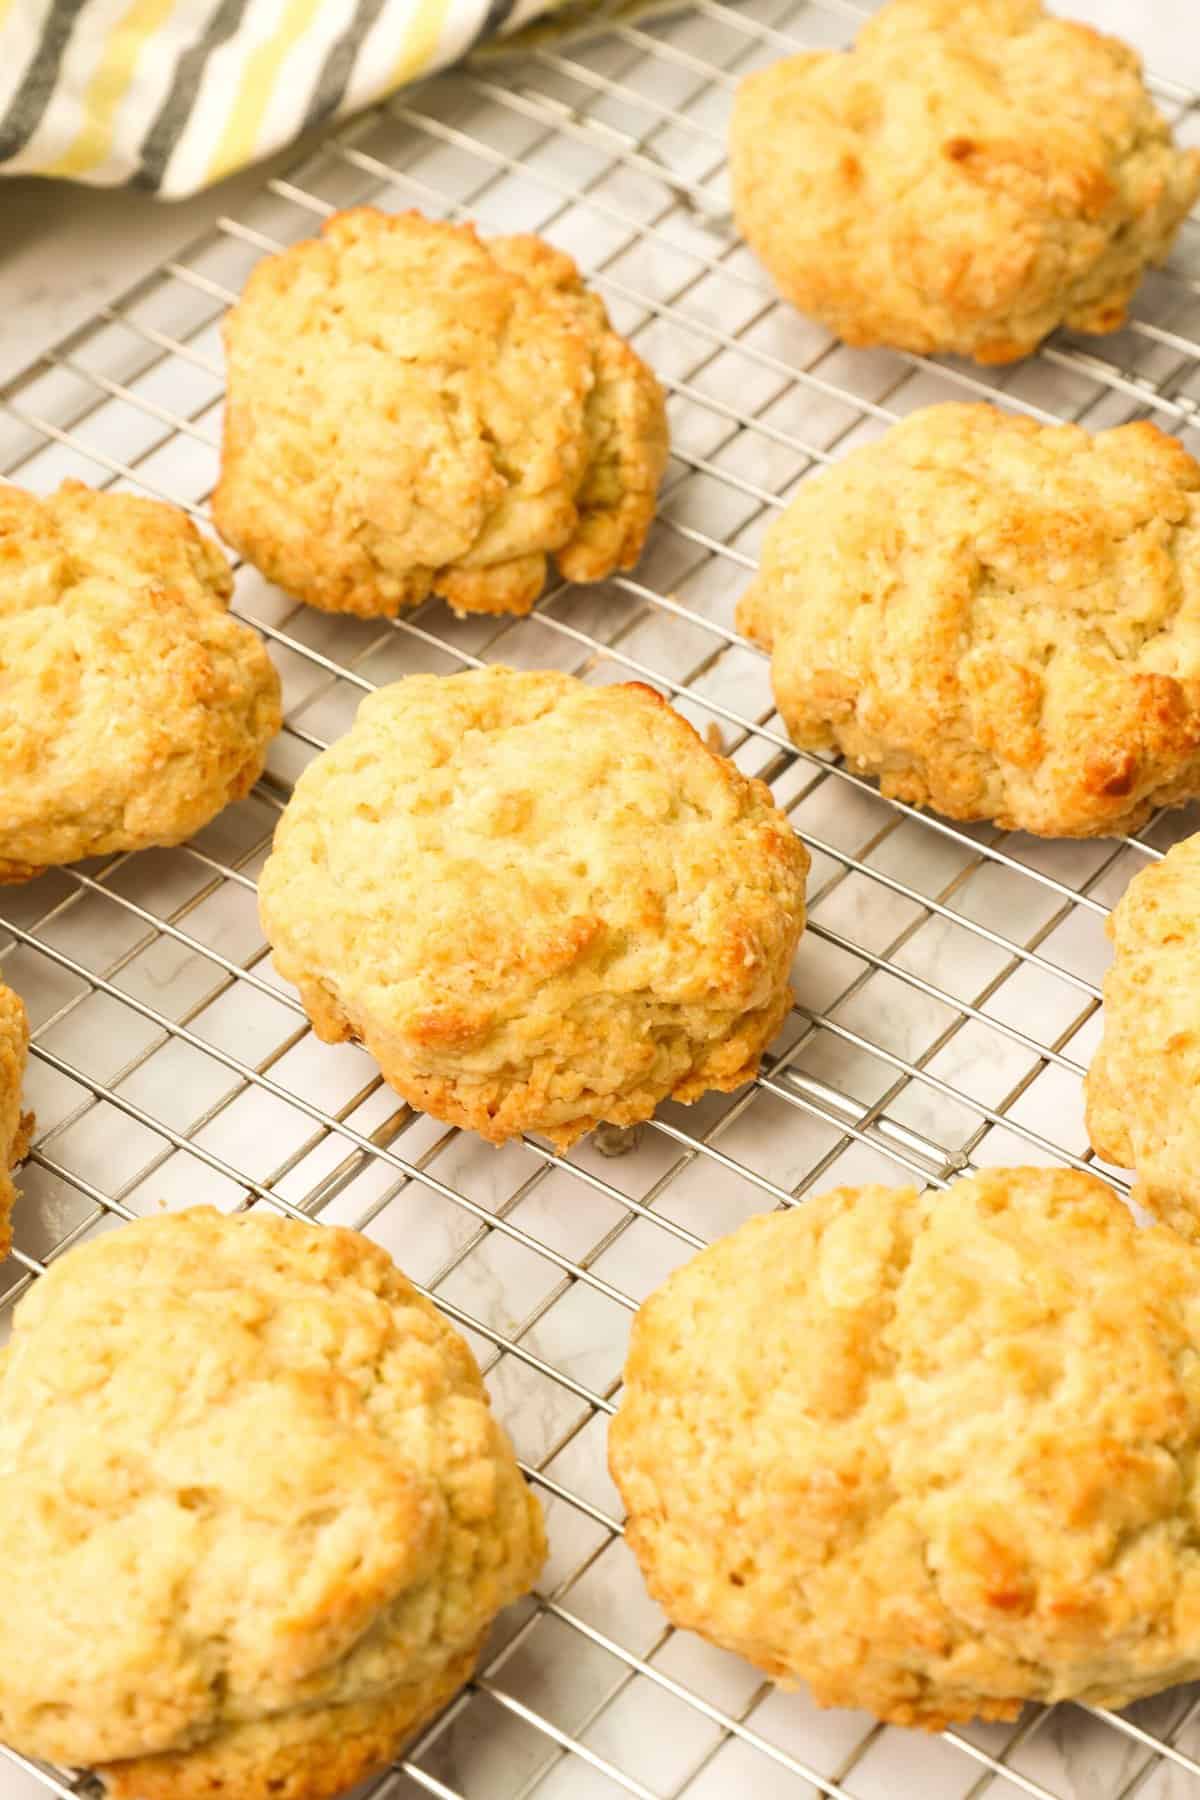 A batch of freshly baked Buttermilk Drop Biscuits